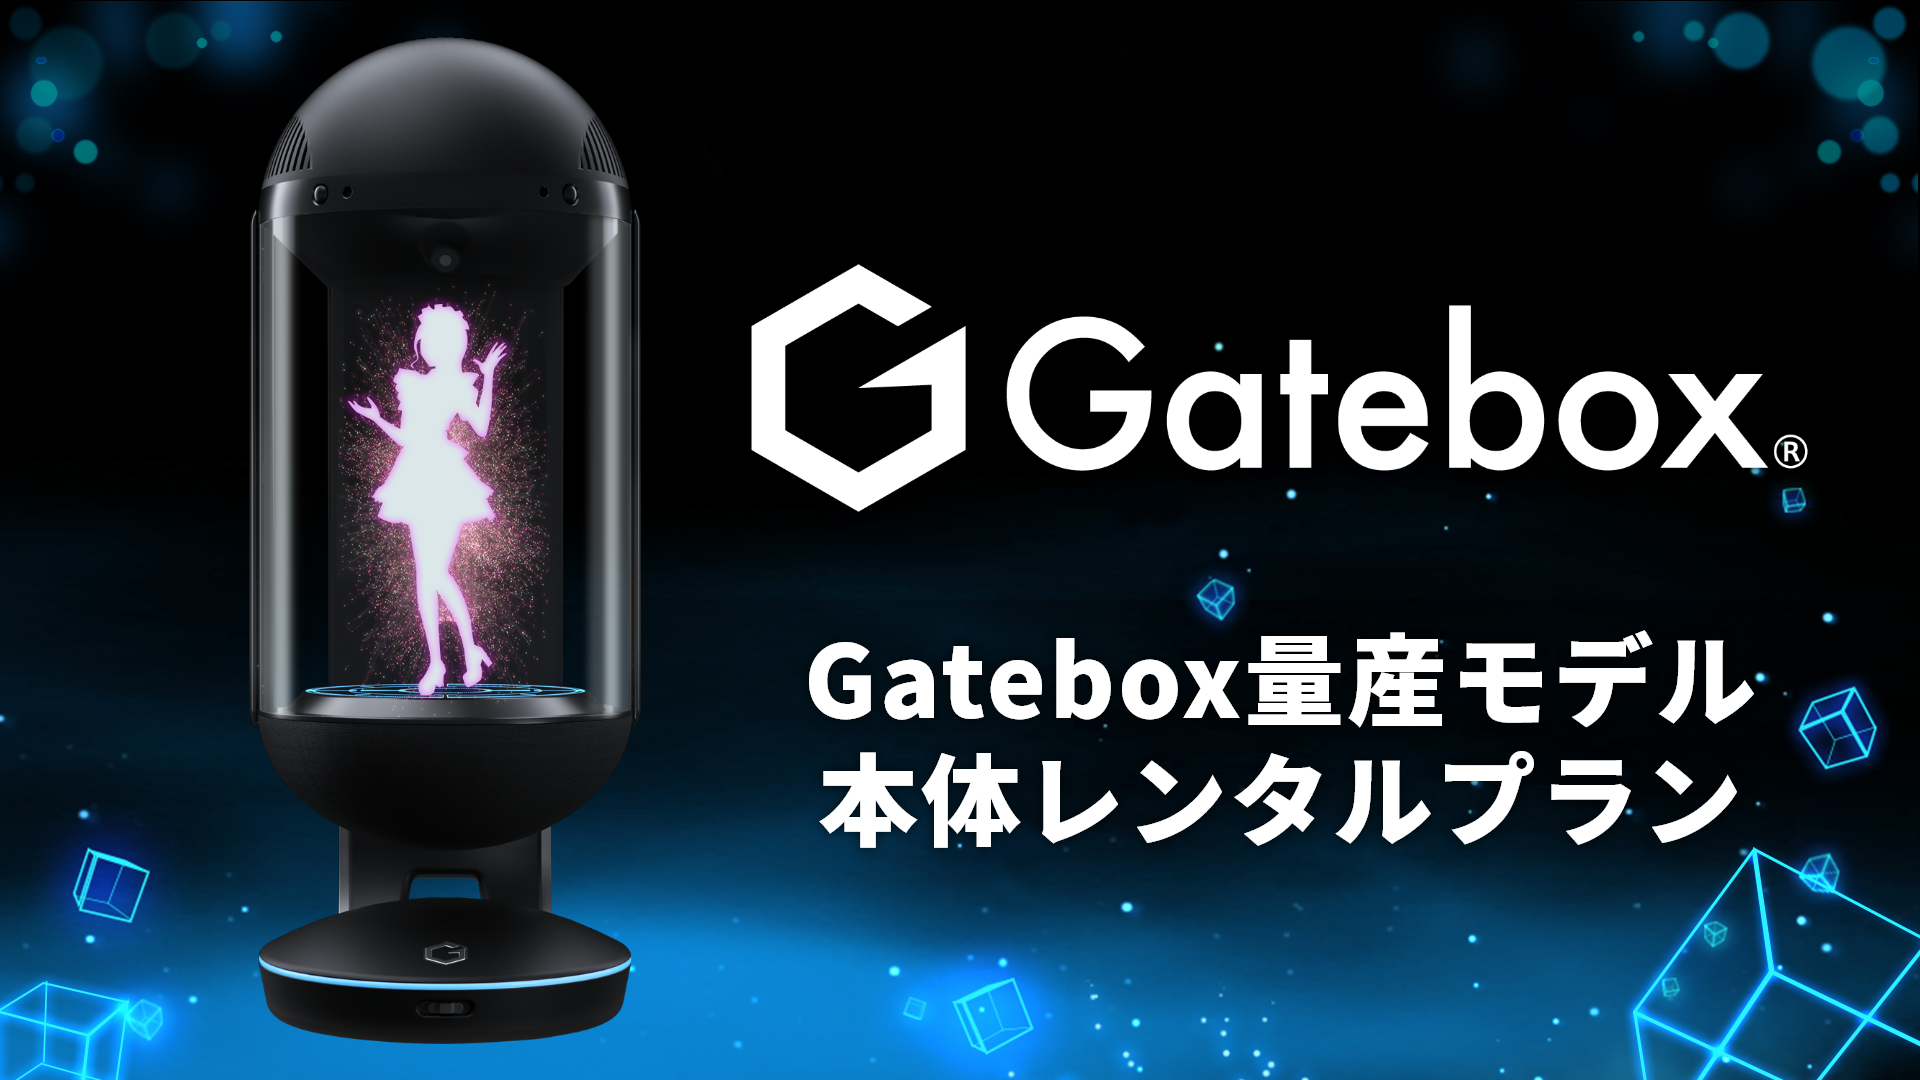 Hikari Azuma, the first character for the Gatebox virtual home robot,...  News Photo - Getty Images